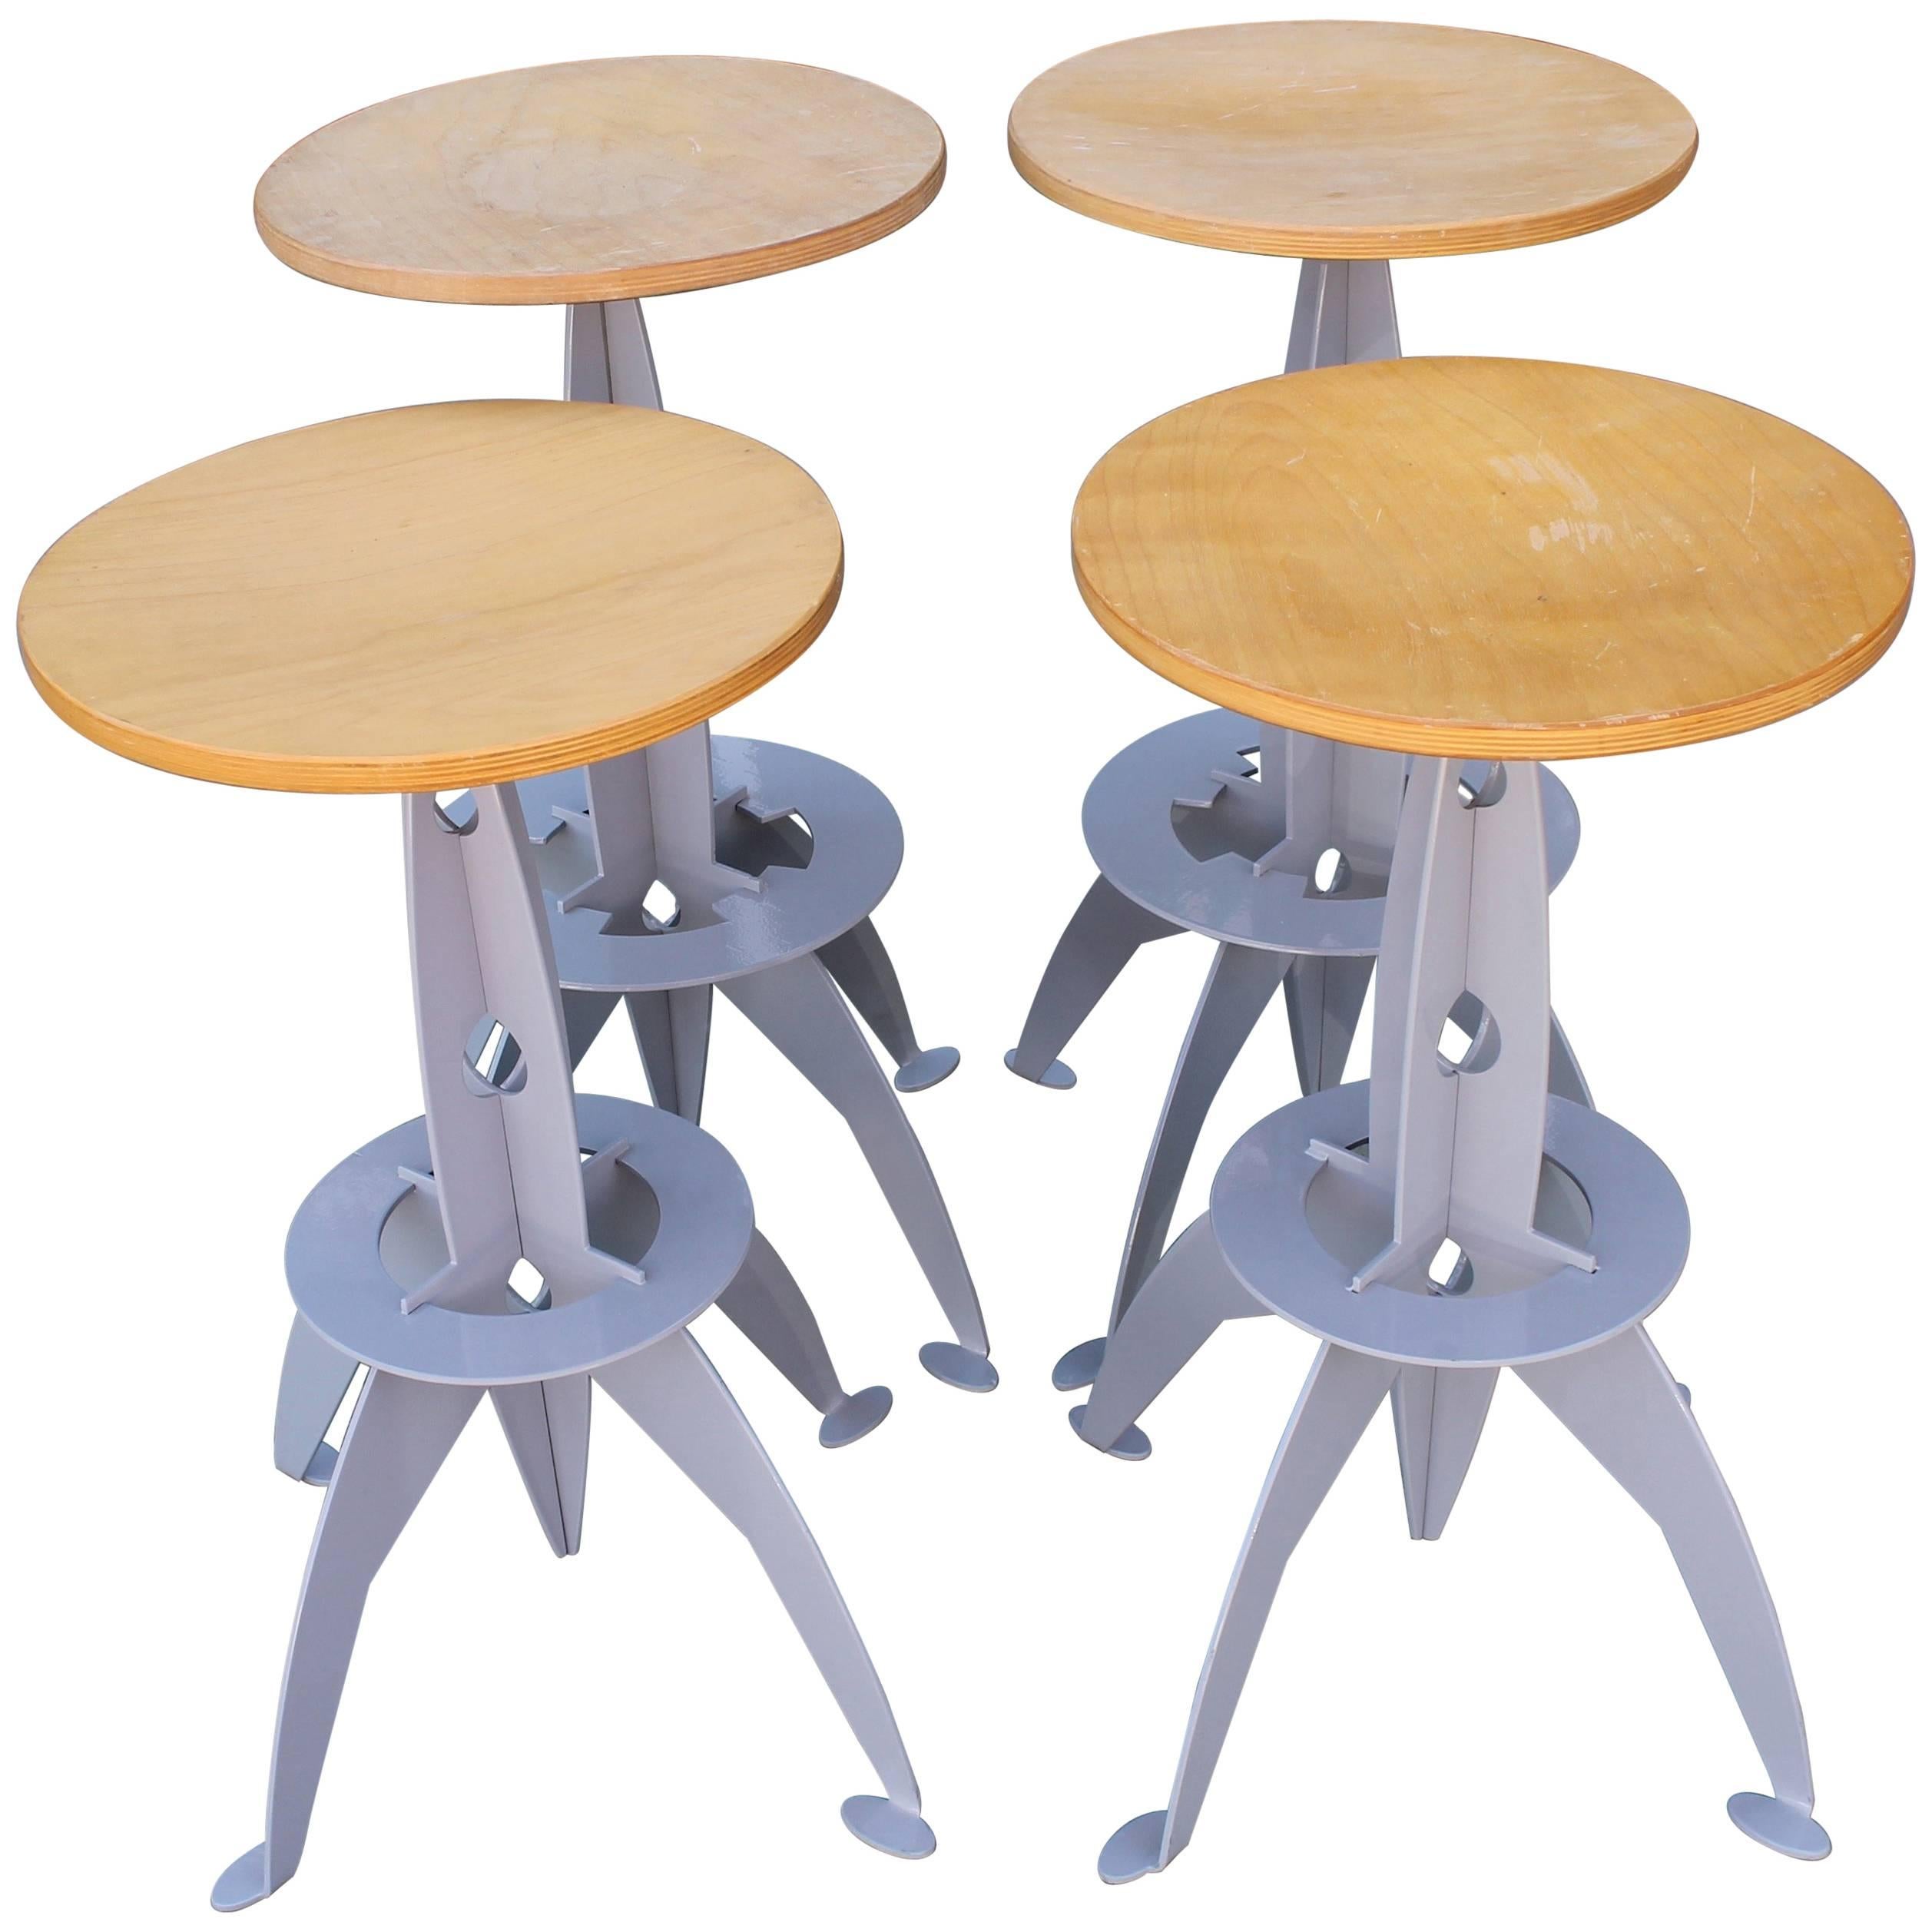 Four Rocket Inspired Barstools For Sale